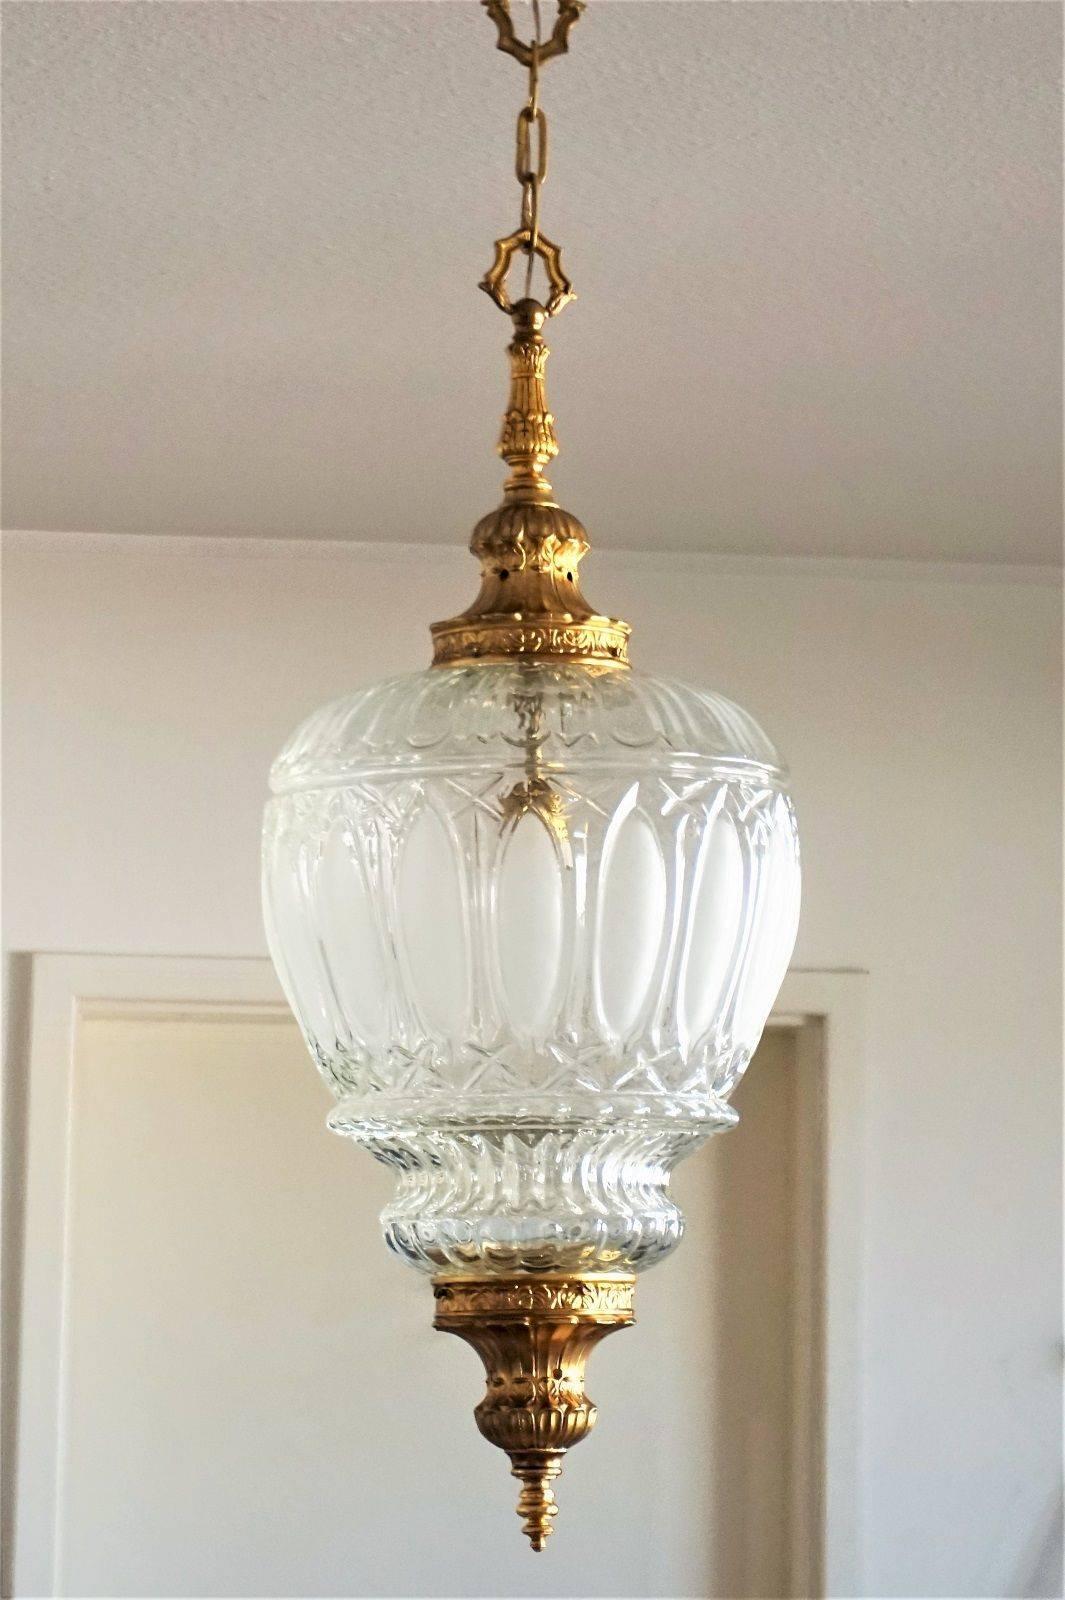 Art Deco cast gilt bronze lantern, pendant with large high relief glass shade, circa 1920. 
One large lamp socket

Measures: Total height: 40 ½ in (103 cm) 
Diameter: 13 ¾ in (35 cm)
Height without chain: 30 in (76 cm)
Glass shade only: D 13 ¾ , H